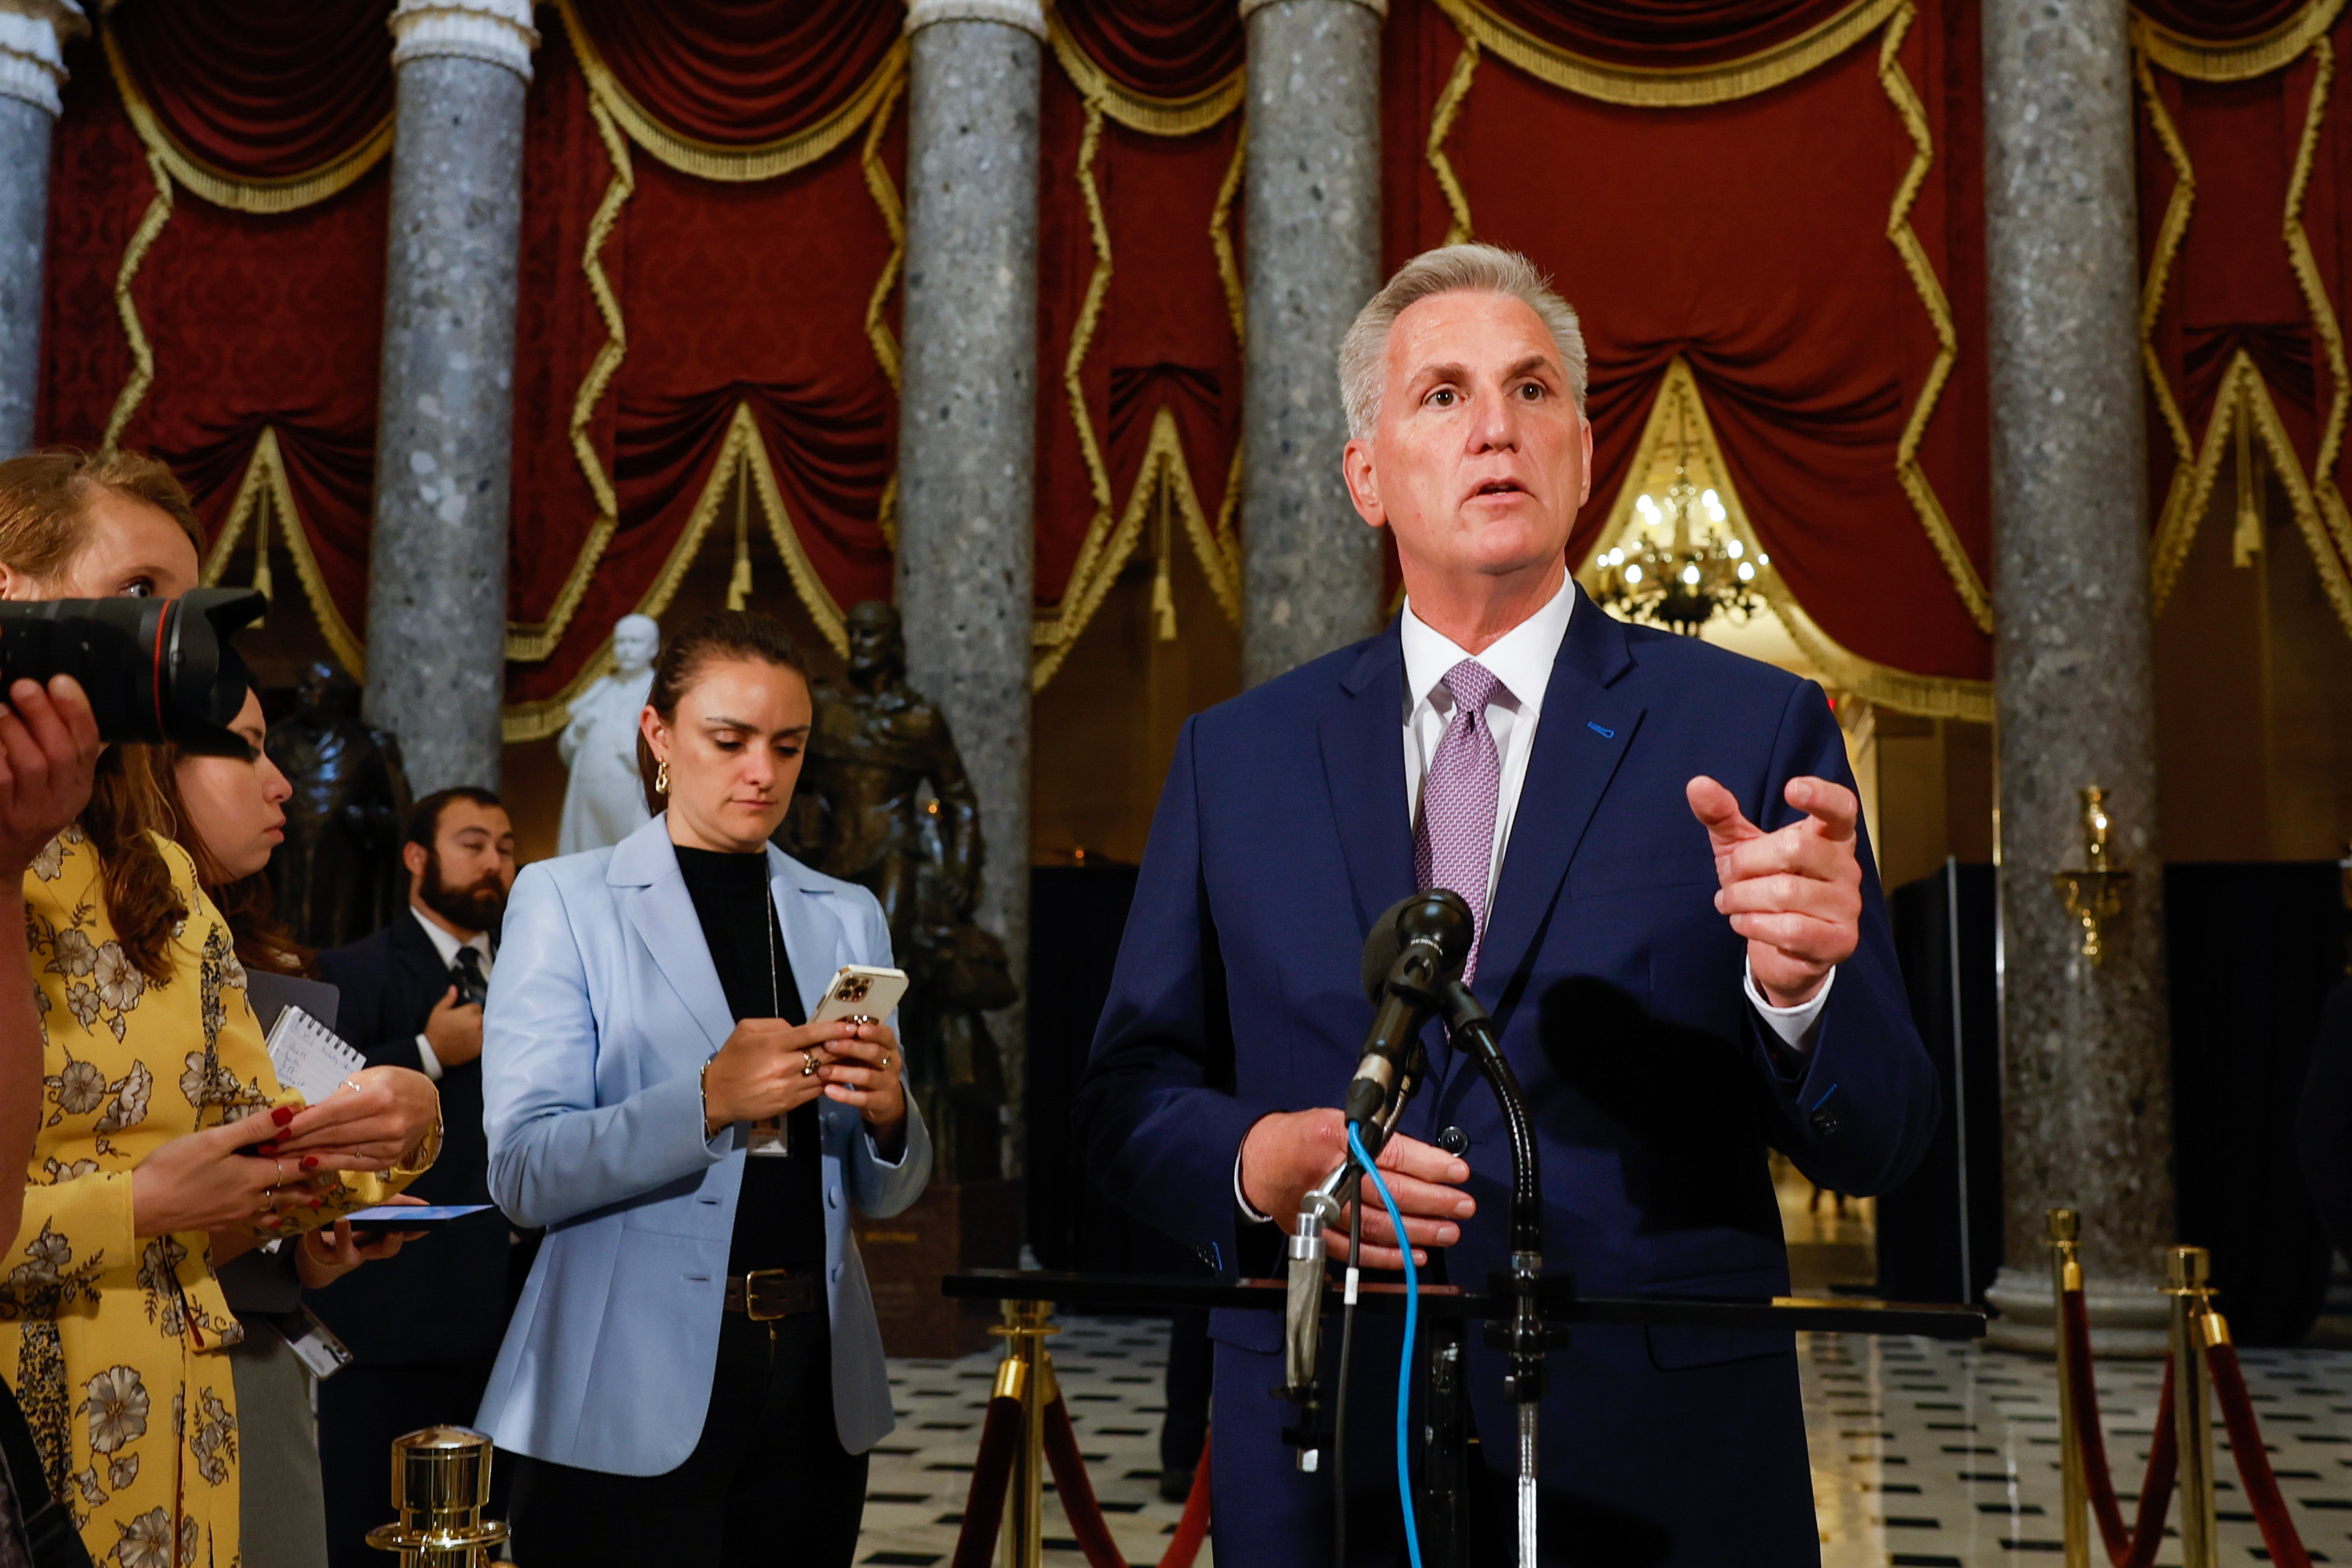 Kevin McCarthy was asked by a reporter to comment on the two prominent GOP figures